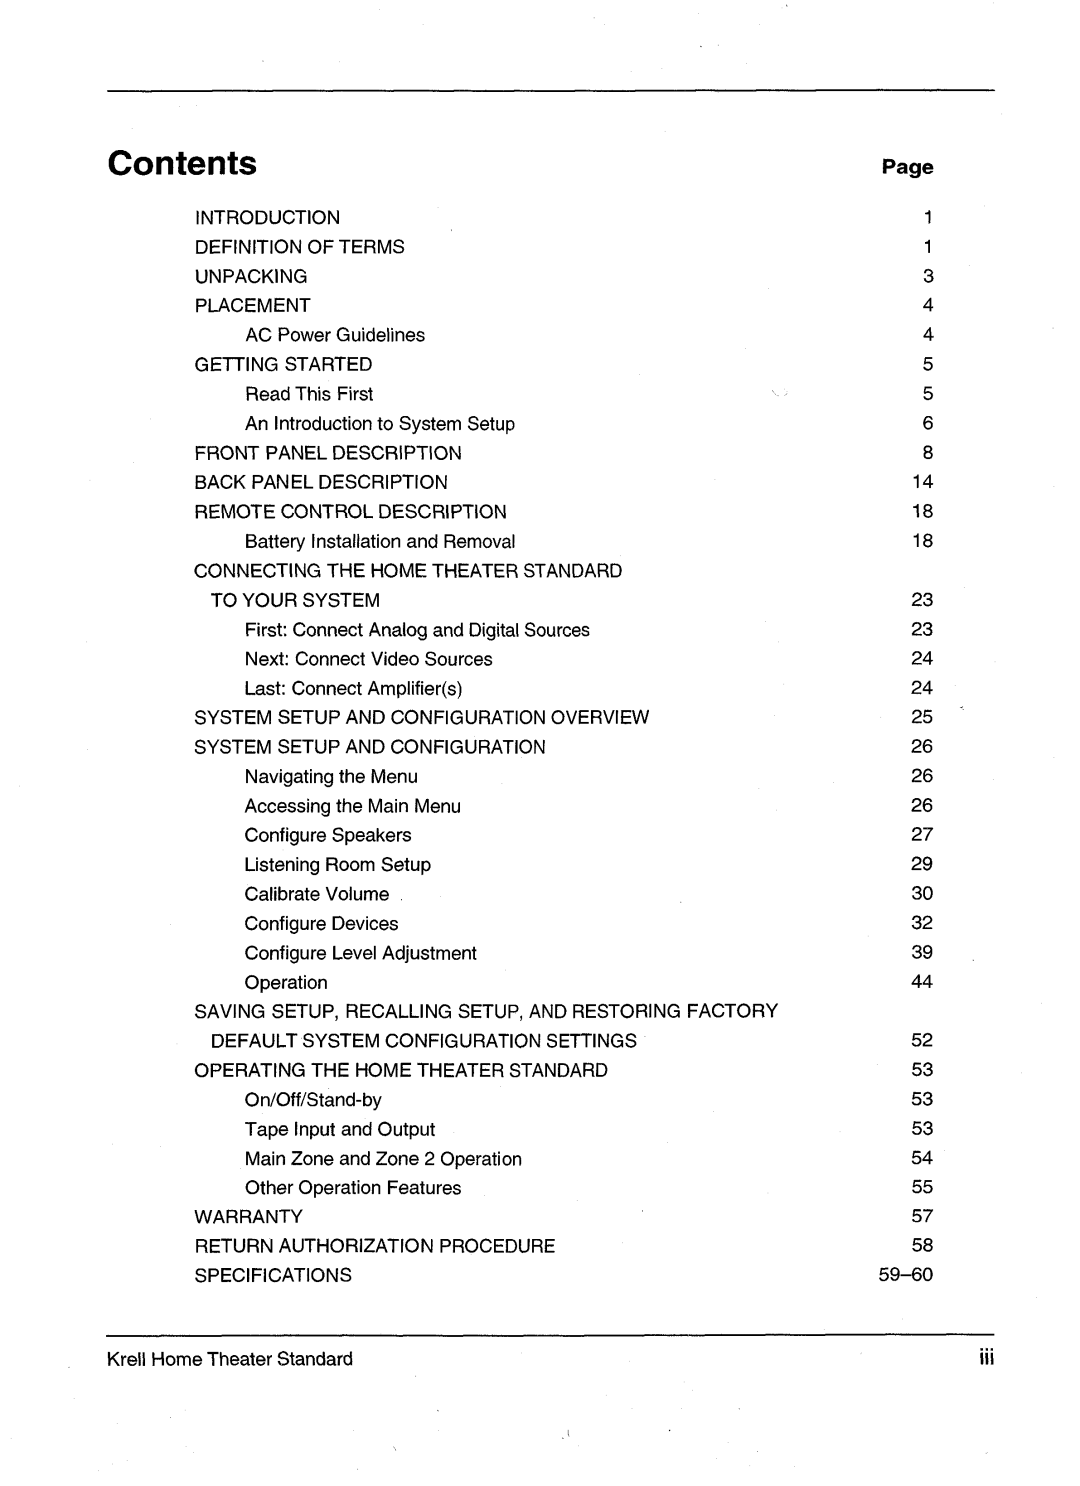 Krell Industries HTS 2 manual Contents, Page 